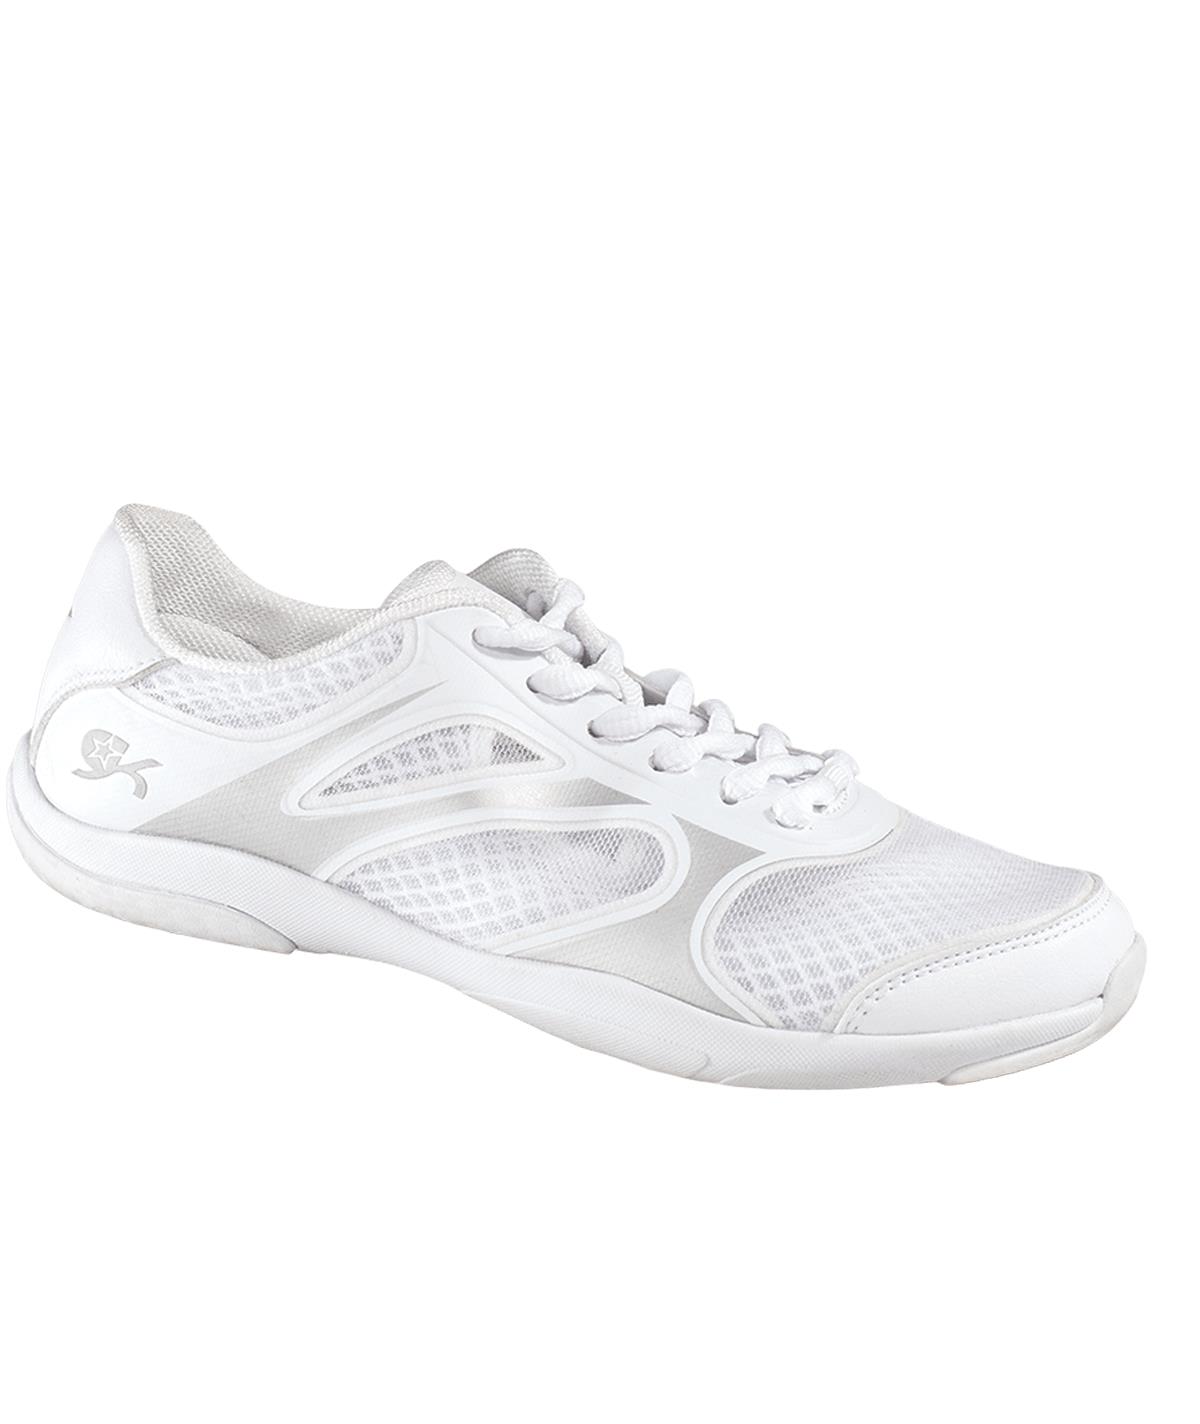 fusion cheer shoes